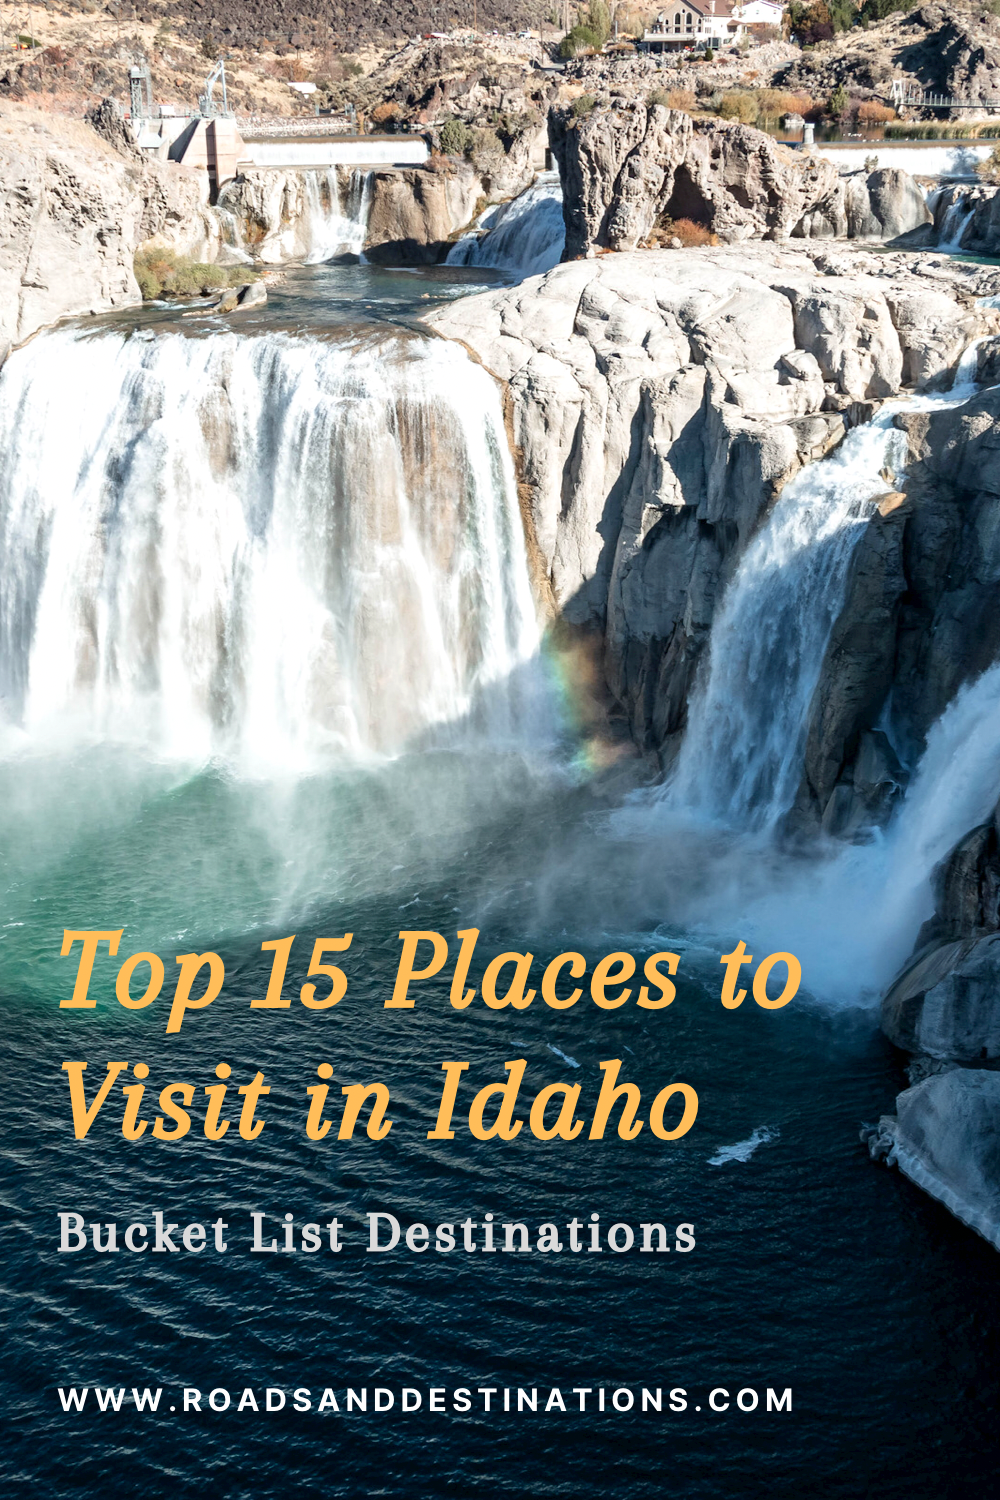 Places to visit in Idaho - Roads and Destinations, roadsanddestinations.com